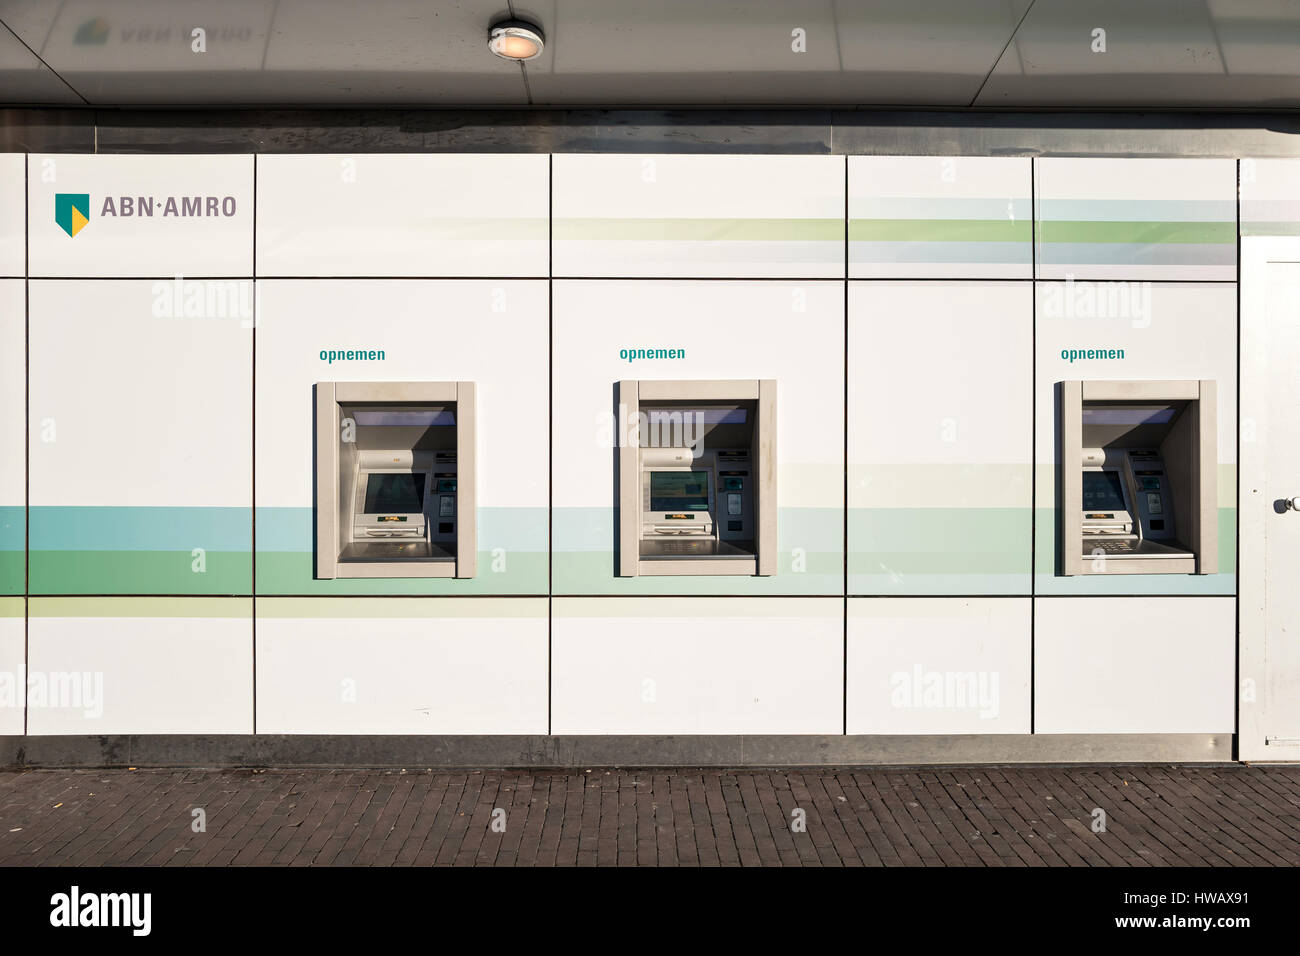 ABN AMRO cash dispensing machines. ABN AMRO is the third-largest bank in the Netherlands. Stock Photo